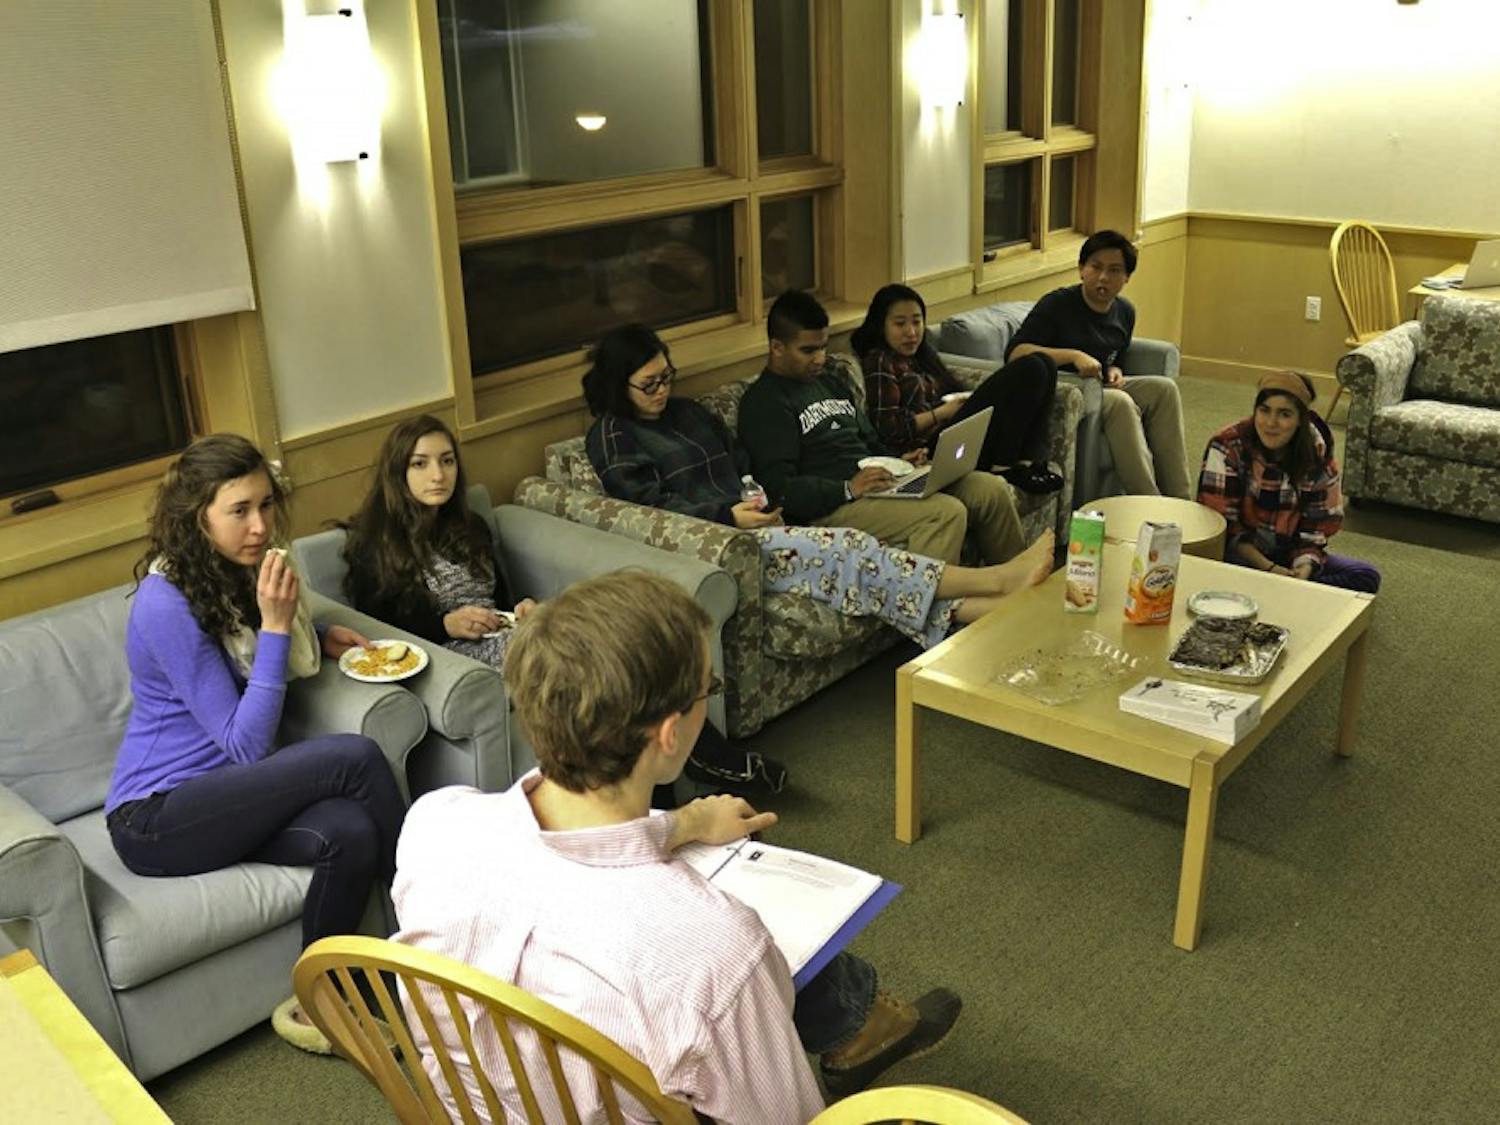 Undergraduate advisers, who act as both peers and mentors, hold regular floor meetings to help foster a sense of community among floormates.